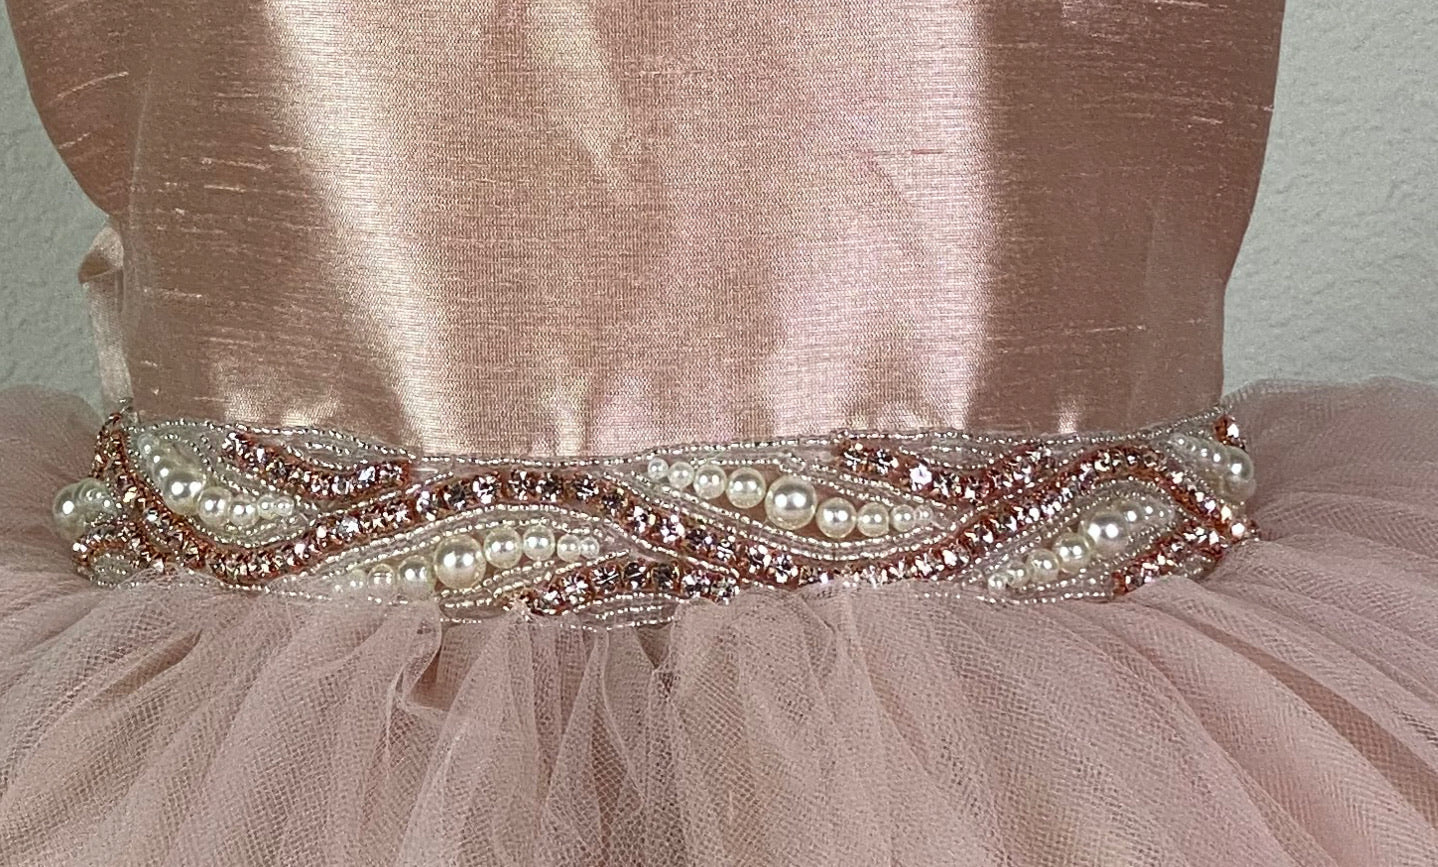 Rose gold ribbed satin bodice Rose gold pearl and rhinestone embellished band along lower bodice Satin skirting with rose gold tulle overlay Pearl button closure Satin rose gold ribbon for bow in back Dress pictured with a petticoat Petticoat not included  Choose from a tulle, cloth, or wire for best look